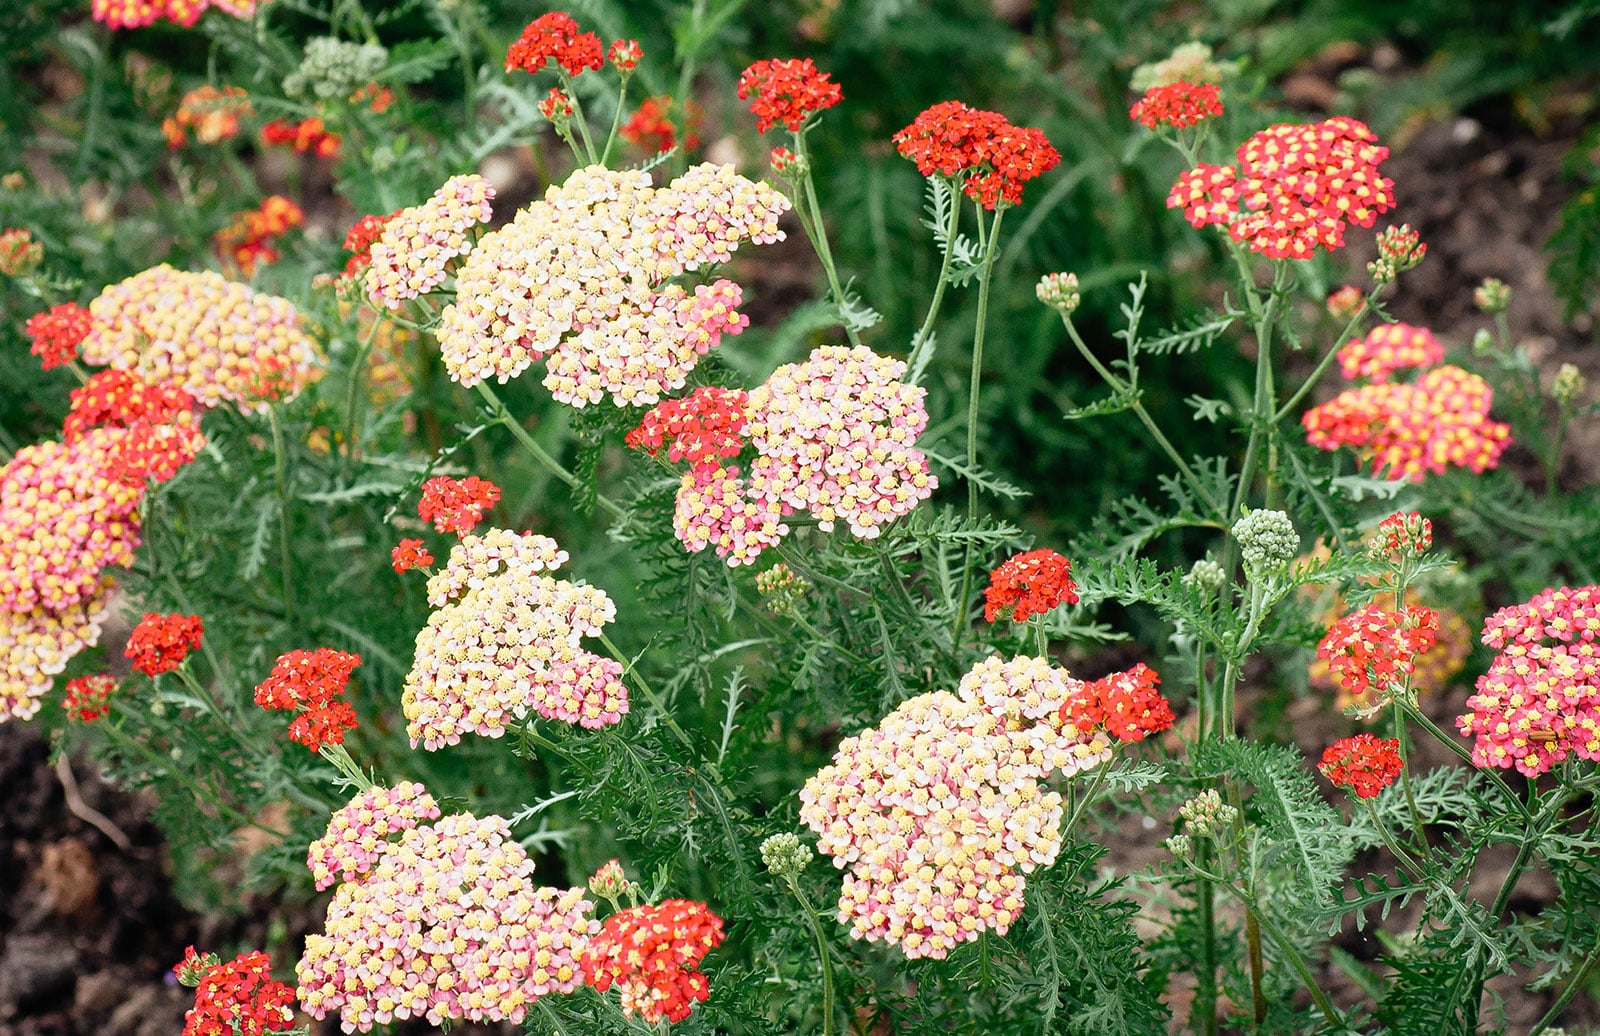 Yarrow with clusters of pink and red flowers